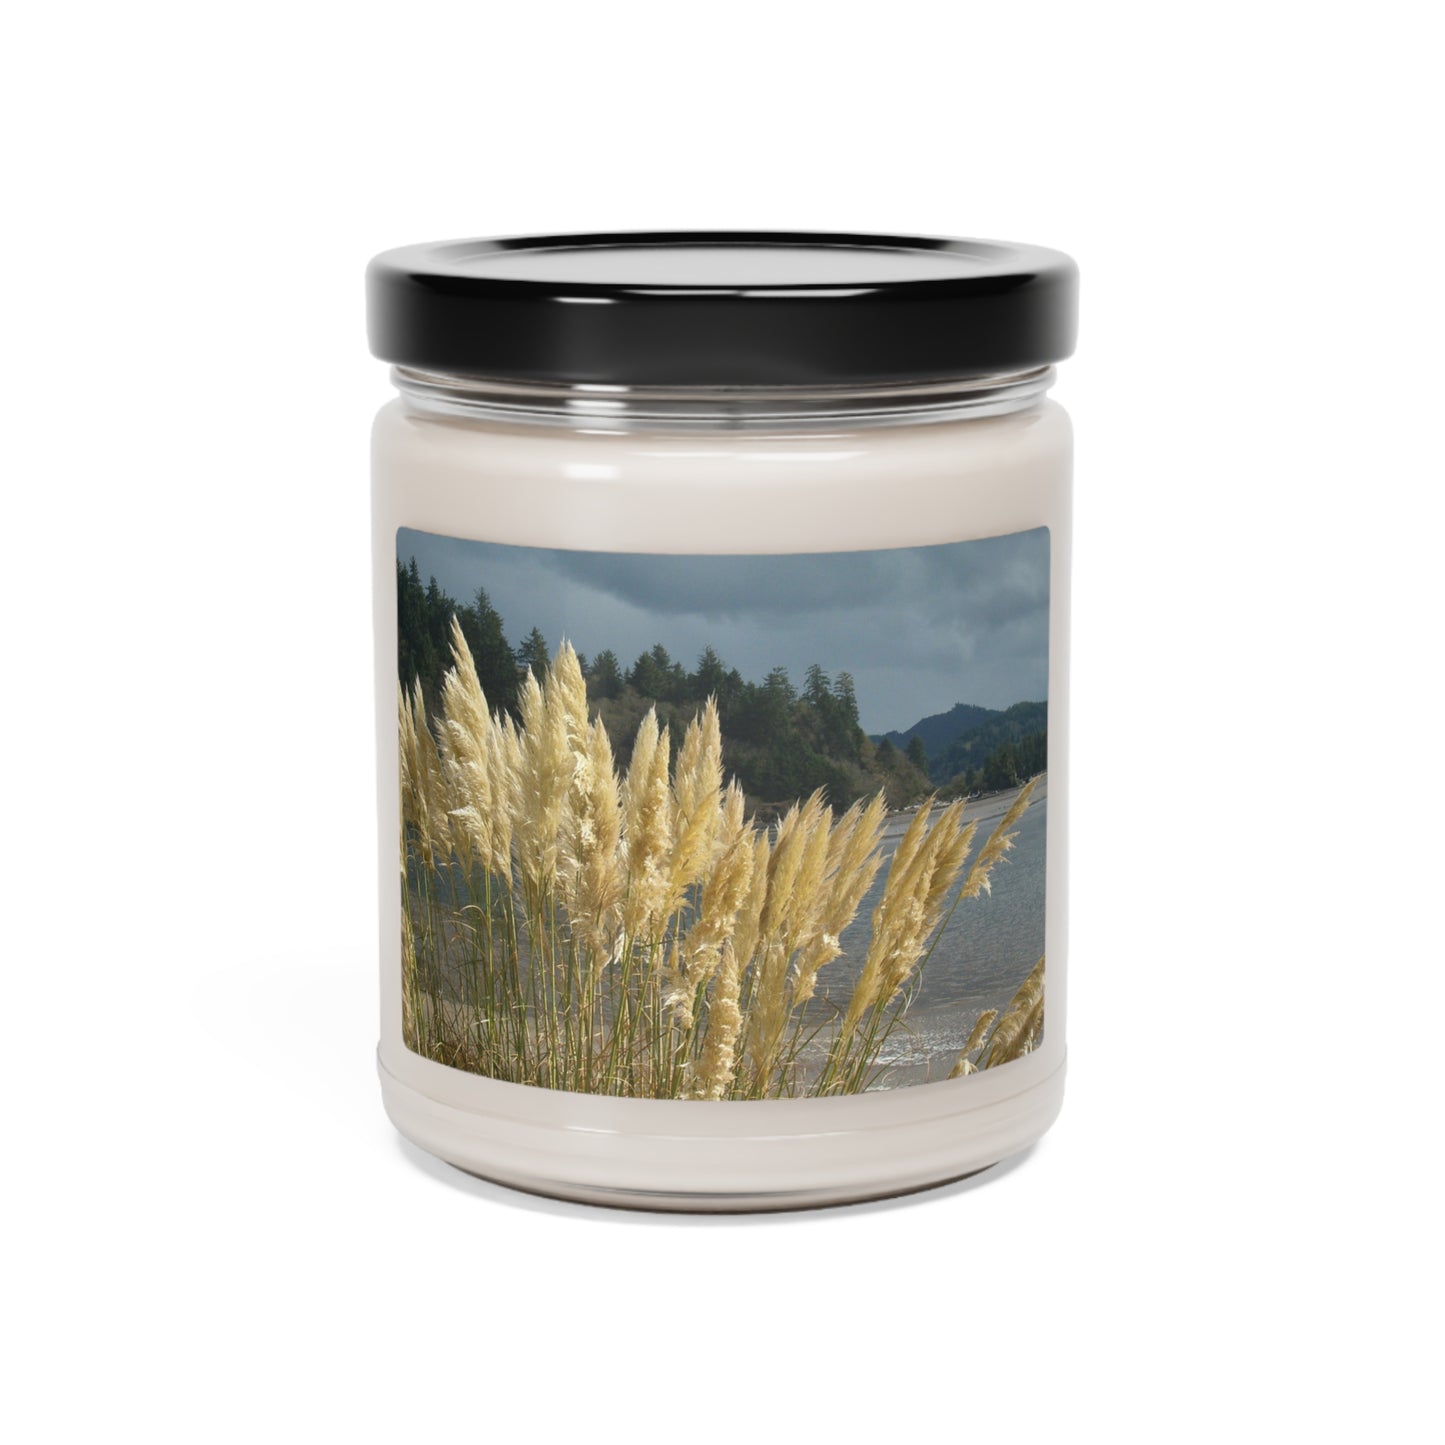 Golden Coastal Pampas Scented Soy Candle, 9oz